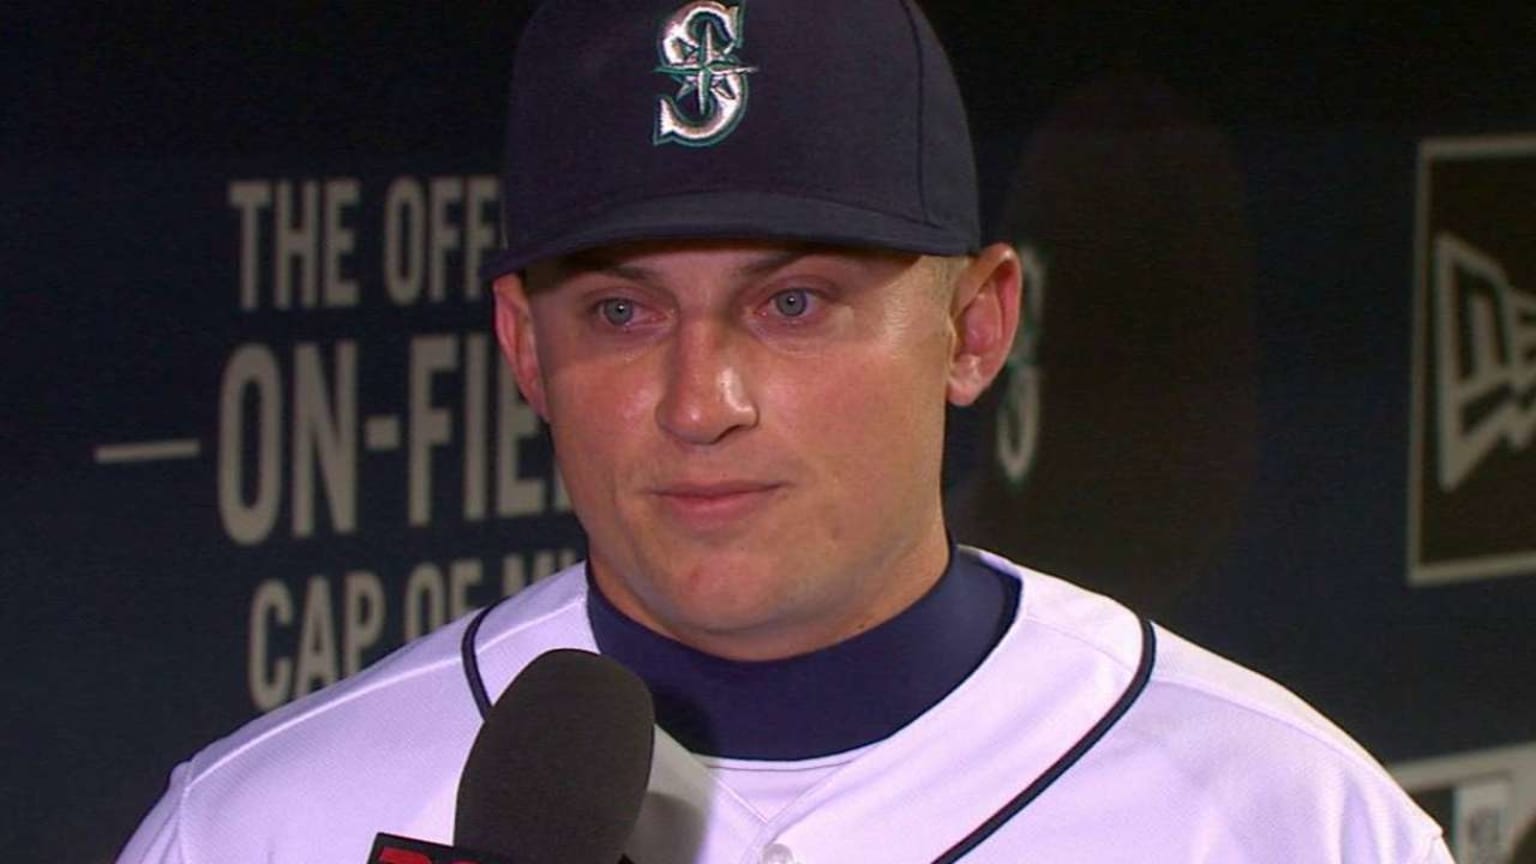 MLB wrap: Kyle Seager's 3-homer night highlights Mariners win